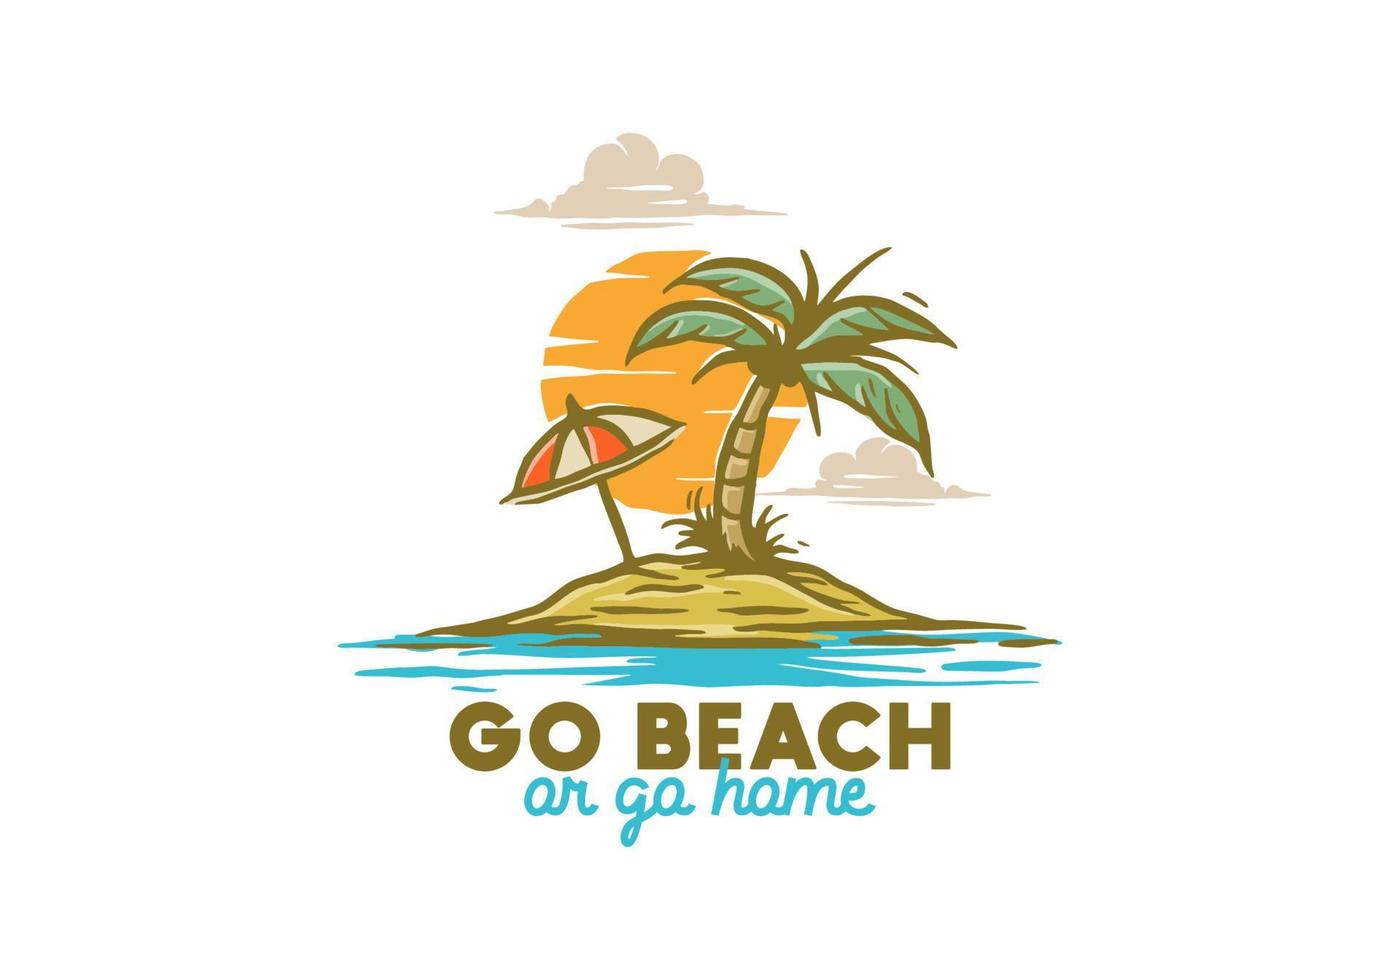 Go beach or go home vintage illustration drawing vector